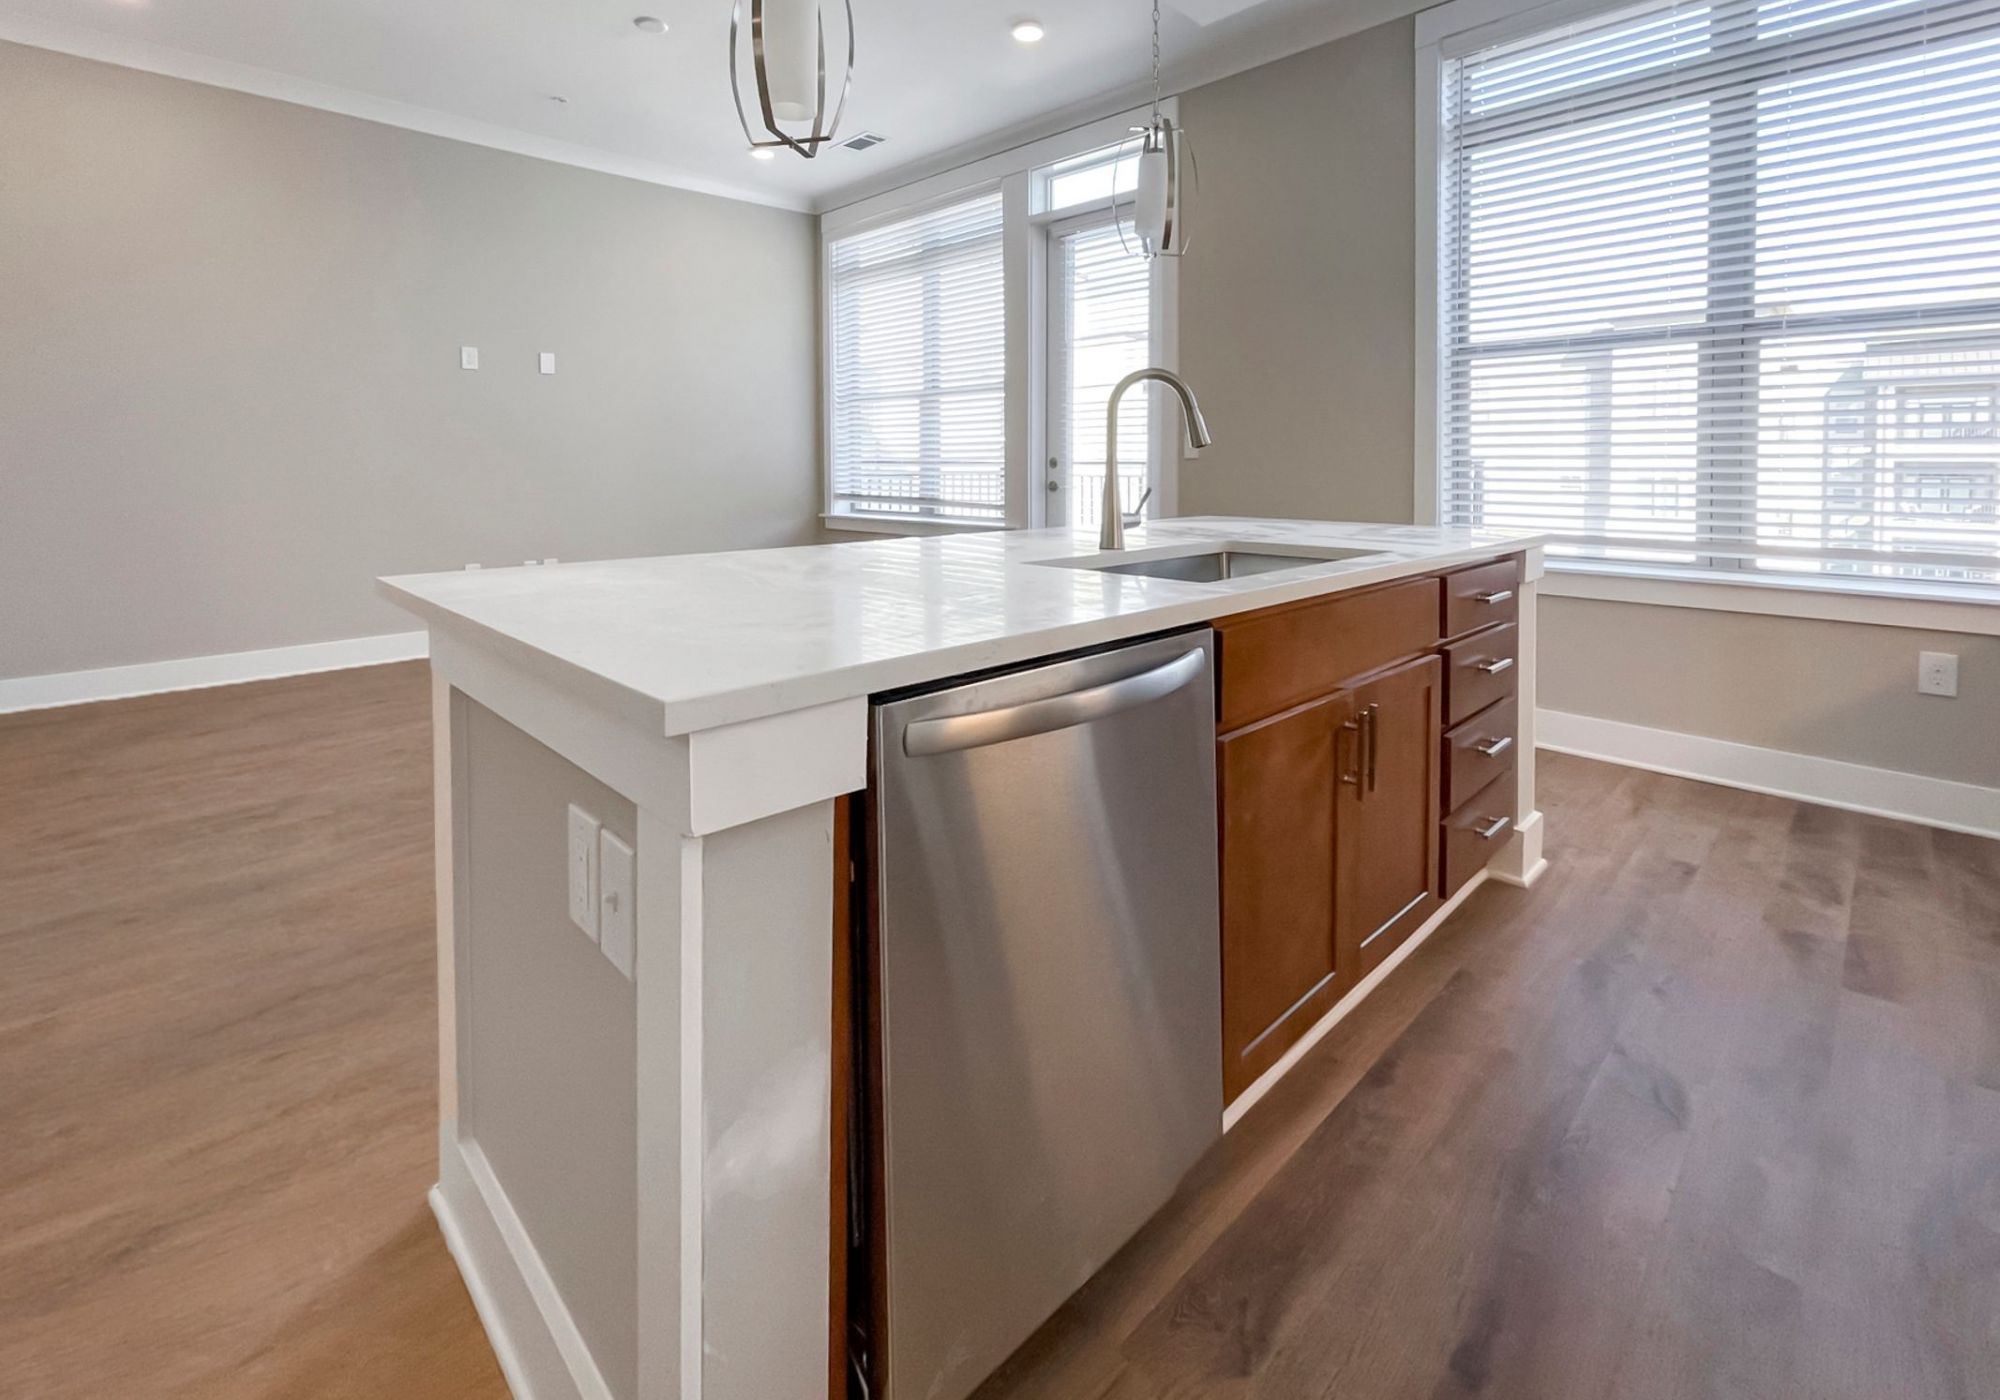 Close up of kitchen island in luxury South Charlotte apartment showing a dishwasher, deep kitchen sink, and cabinet storage